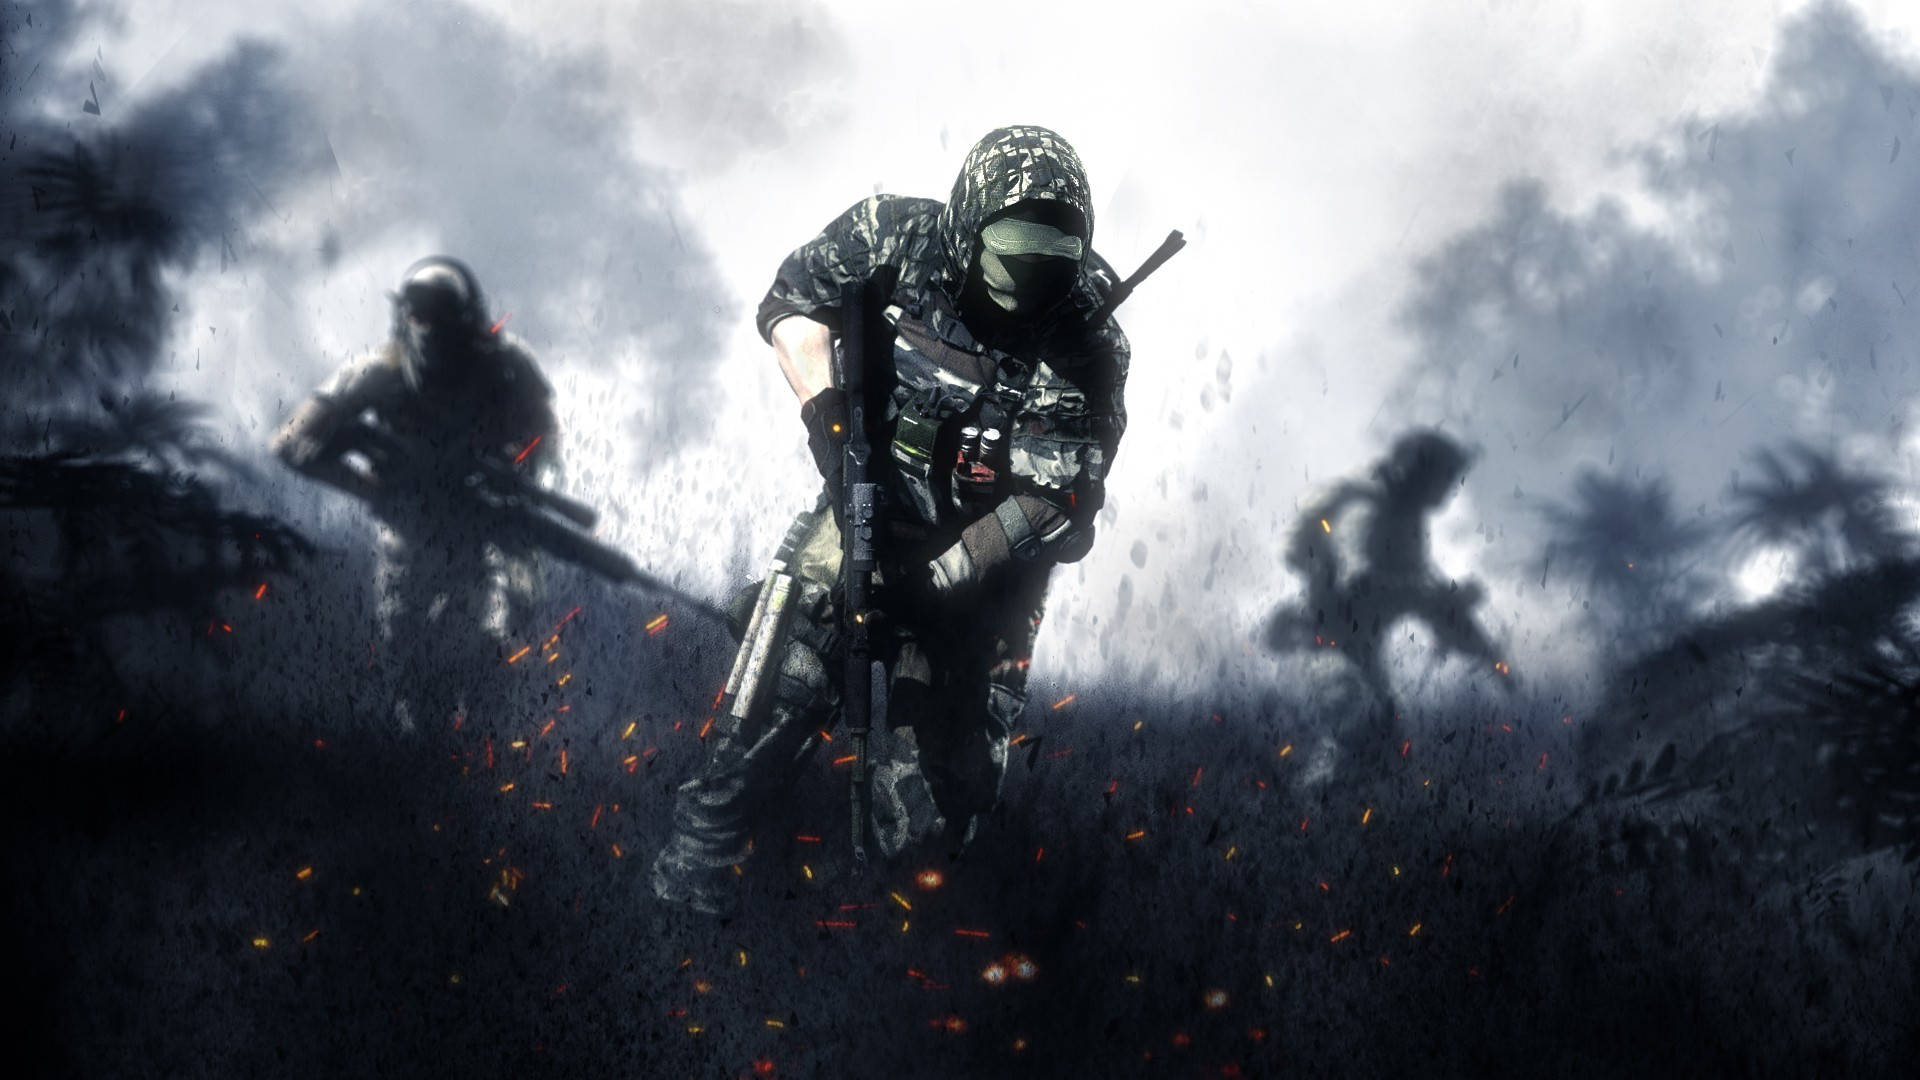 Get Ready for High-Octane Action with Cool Battlefield 3 Wallpaper